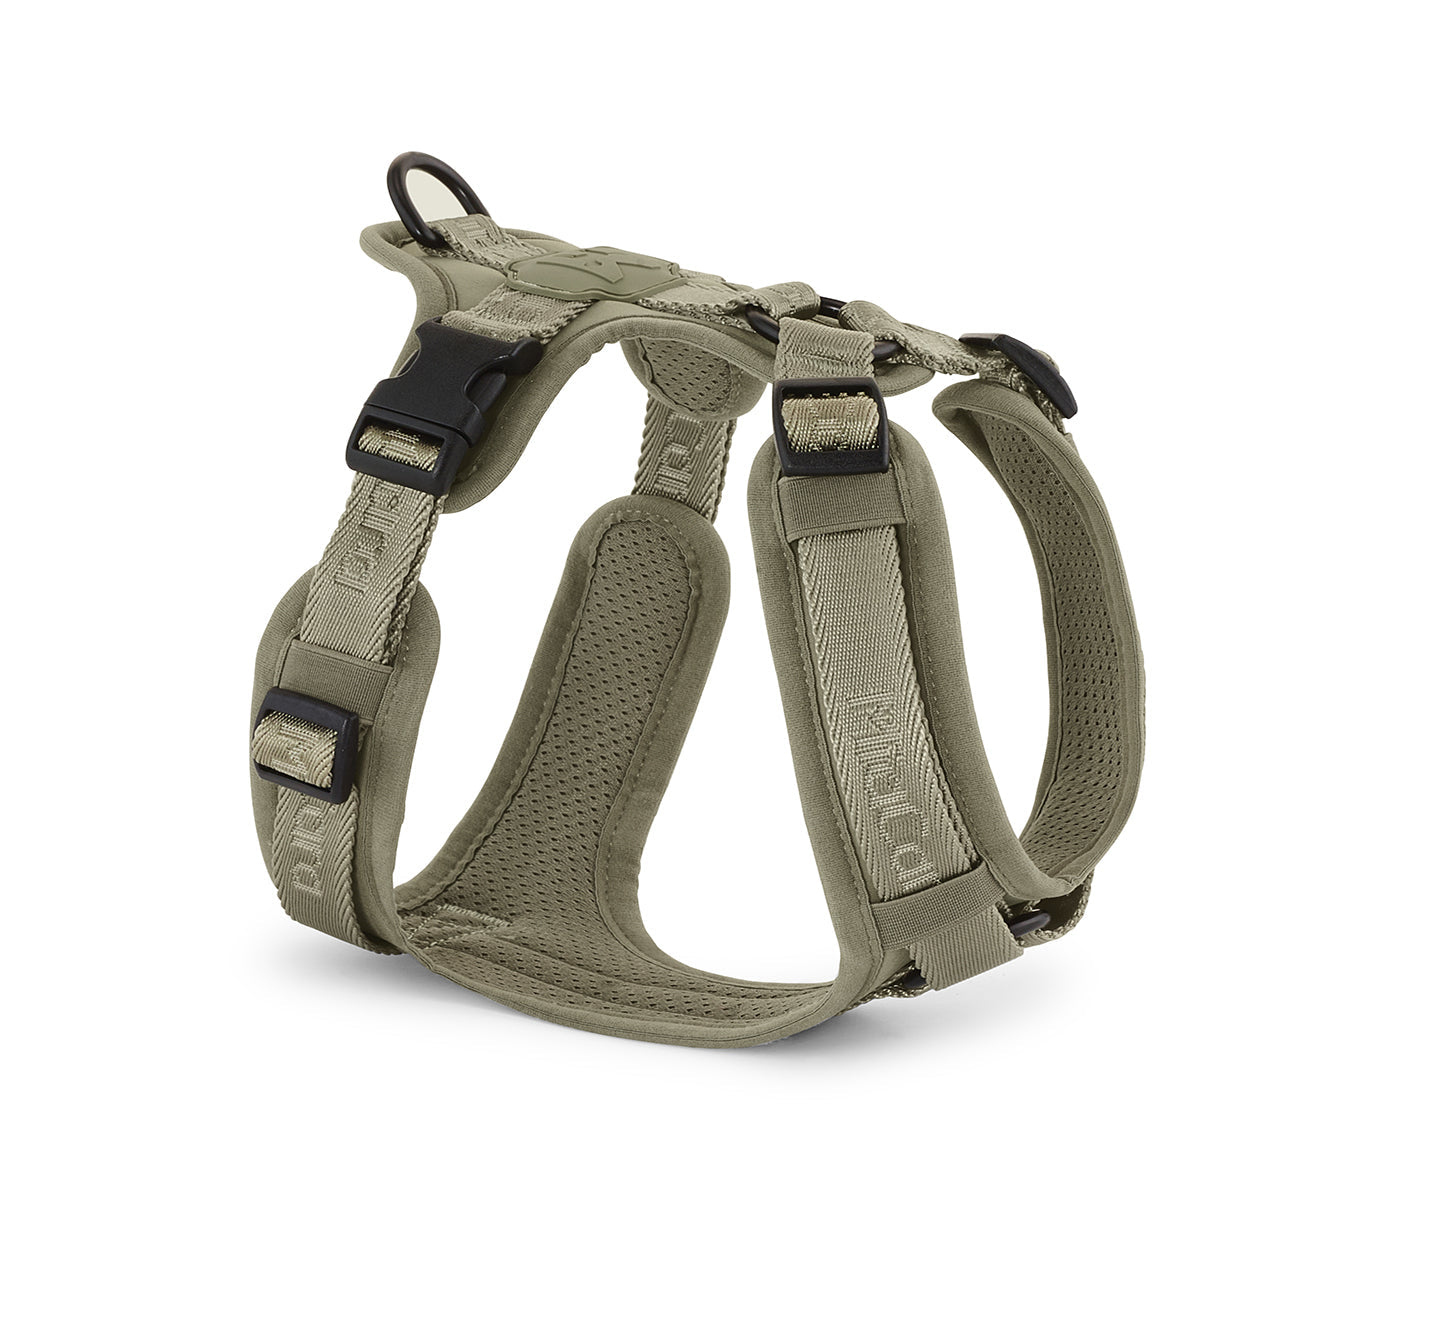 SKU:: C04-009-03-XS || Quick-release buckles on MiaCara Dog Harness for ease of use